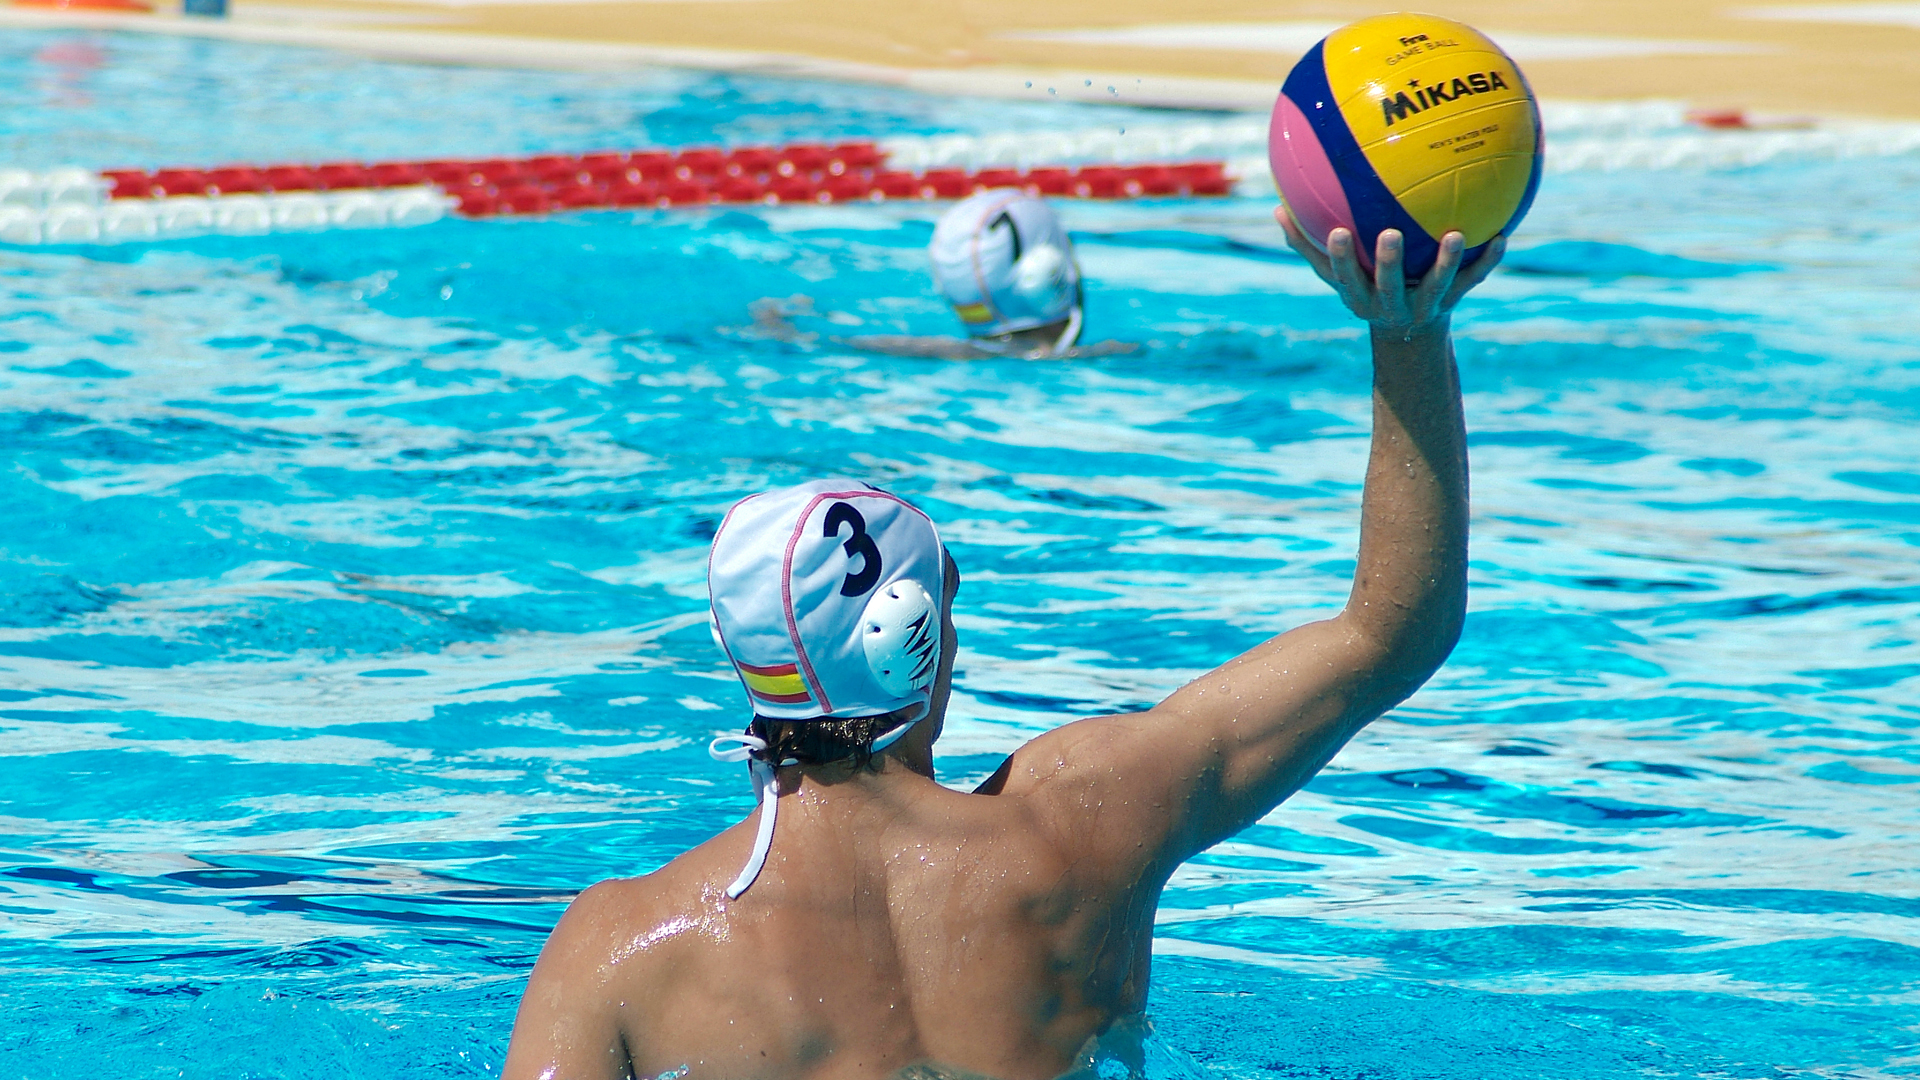 water-polo-ball-floating-near